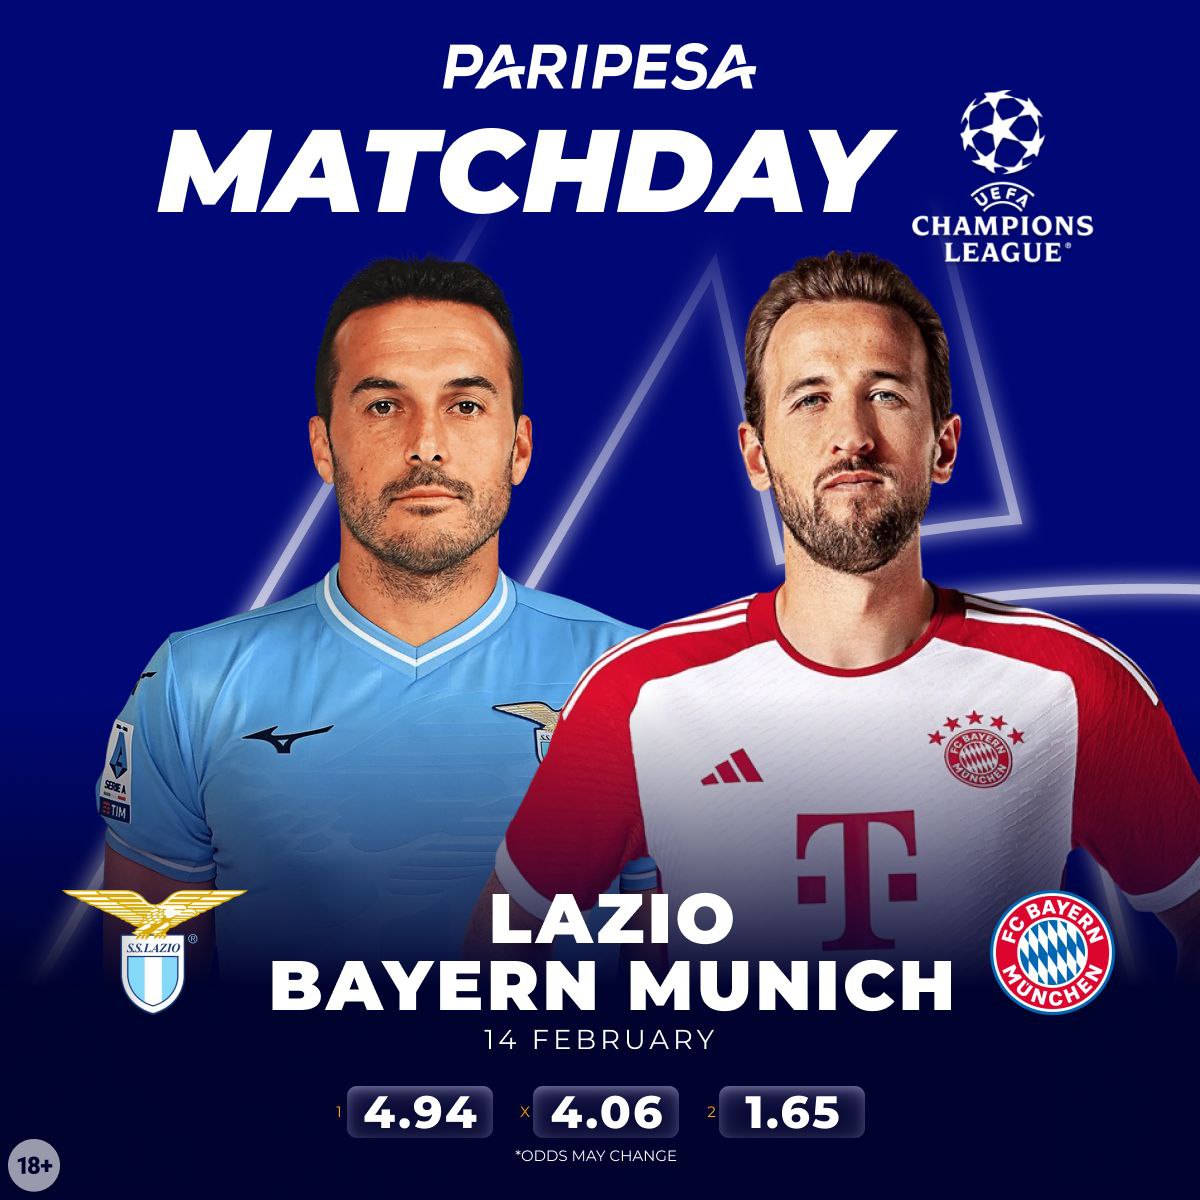 ☄️Exciting UCL🏆 showdown alert!🔴

Lazio takes on Bayern Munich in the Champions League!🇮🇹🇩🇪

Register on paripesa here➡️bit.ly/44NYMwM
For Bonus use Promo💰Code: ARTINS

Who do you think will come out on top?👀

#LazioBayern #ChampionsLeague